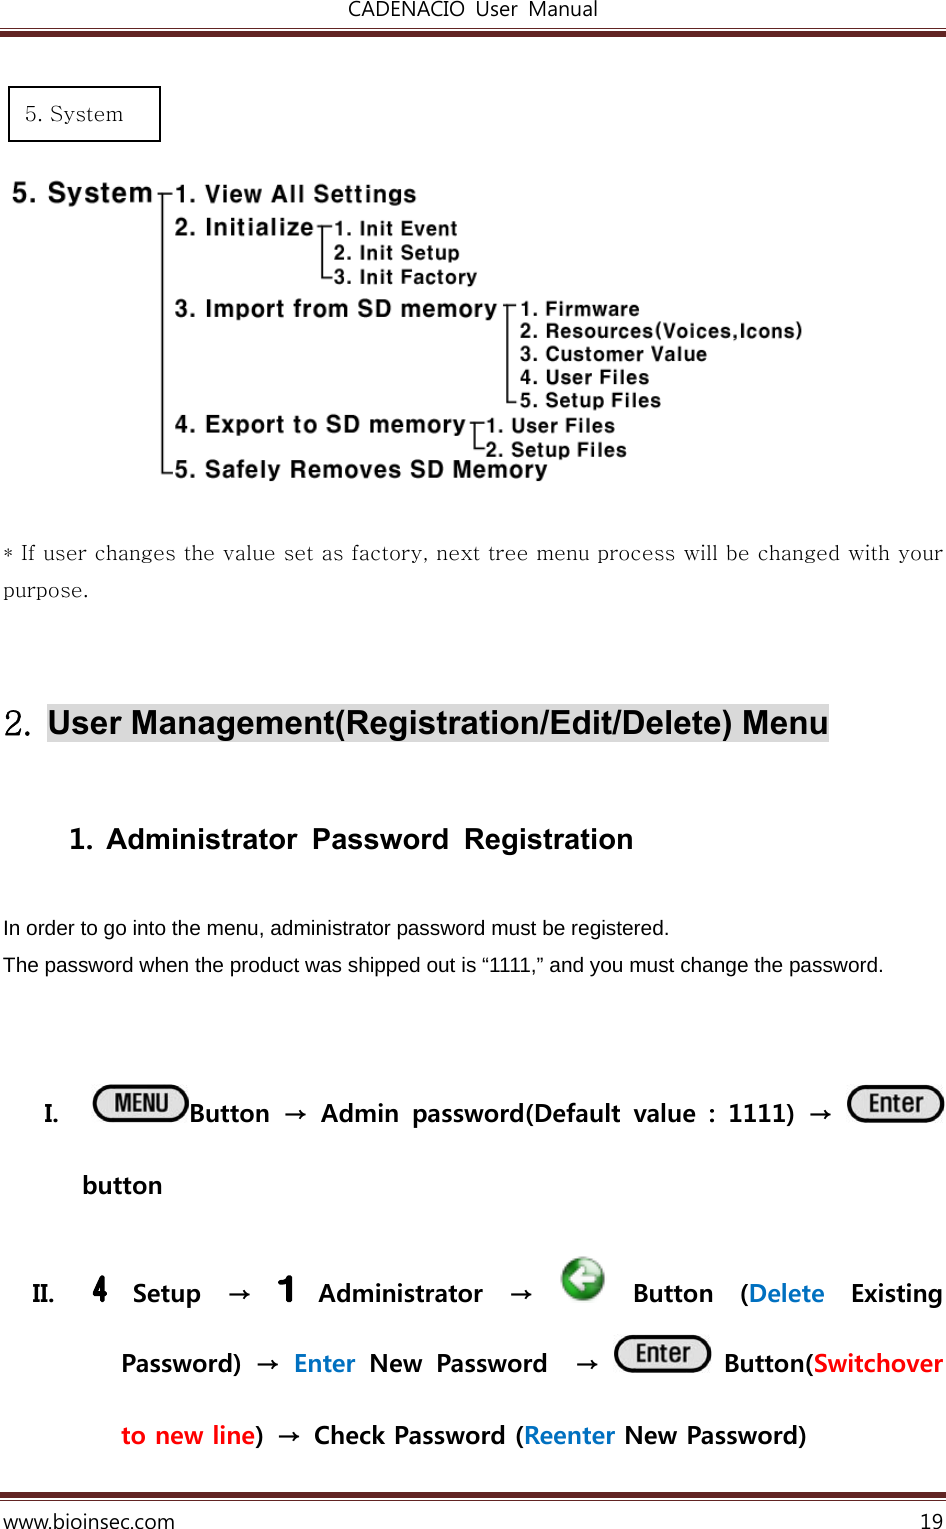 CADENACIO  User  Manual  www.bioinsec.com 19       * If user changes the value set as factory, next tree menu process will be changed with your purpose.   2.  User Management(Registration/Edit/Delete) Menu  1. Administrator Password Registration  In order to go into the menu, administrator password must be registered. The password when the product was shipped out is “1111,” and you must change the password.  I. Button  →  Admin  password(Default  value  :  1111)  →   button II.  Setup  →   Administrator  →    Button  (Delete  Existing Password)  →  Enter  New Password  →    Button(Switchover to new line)  →  Check Password (Reenter New Password)   5. System 